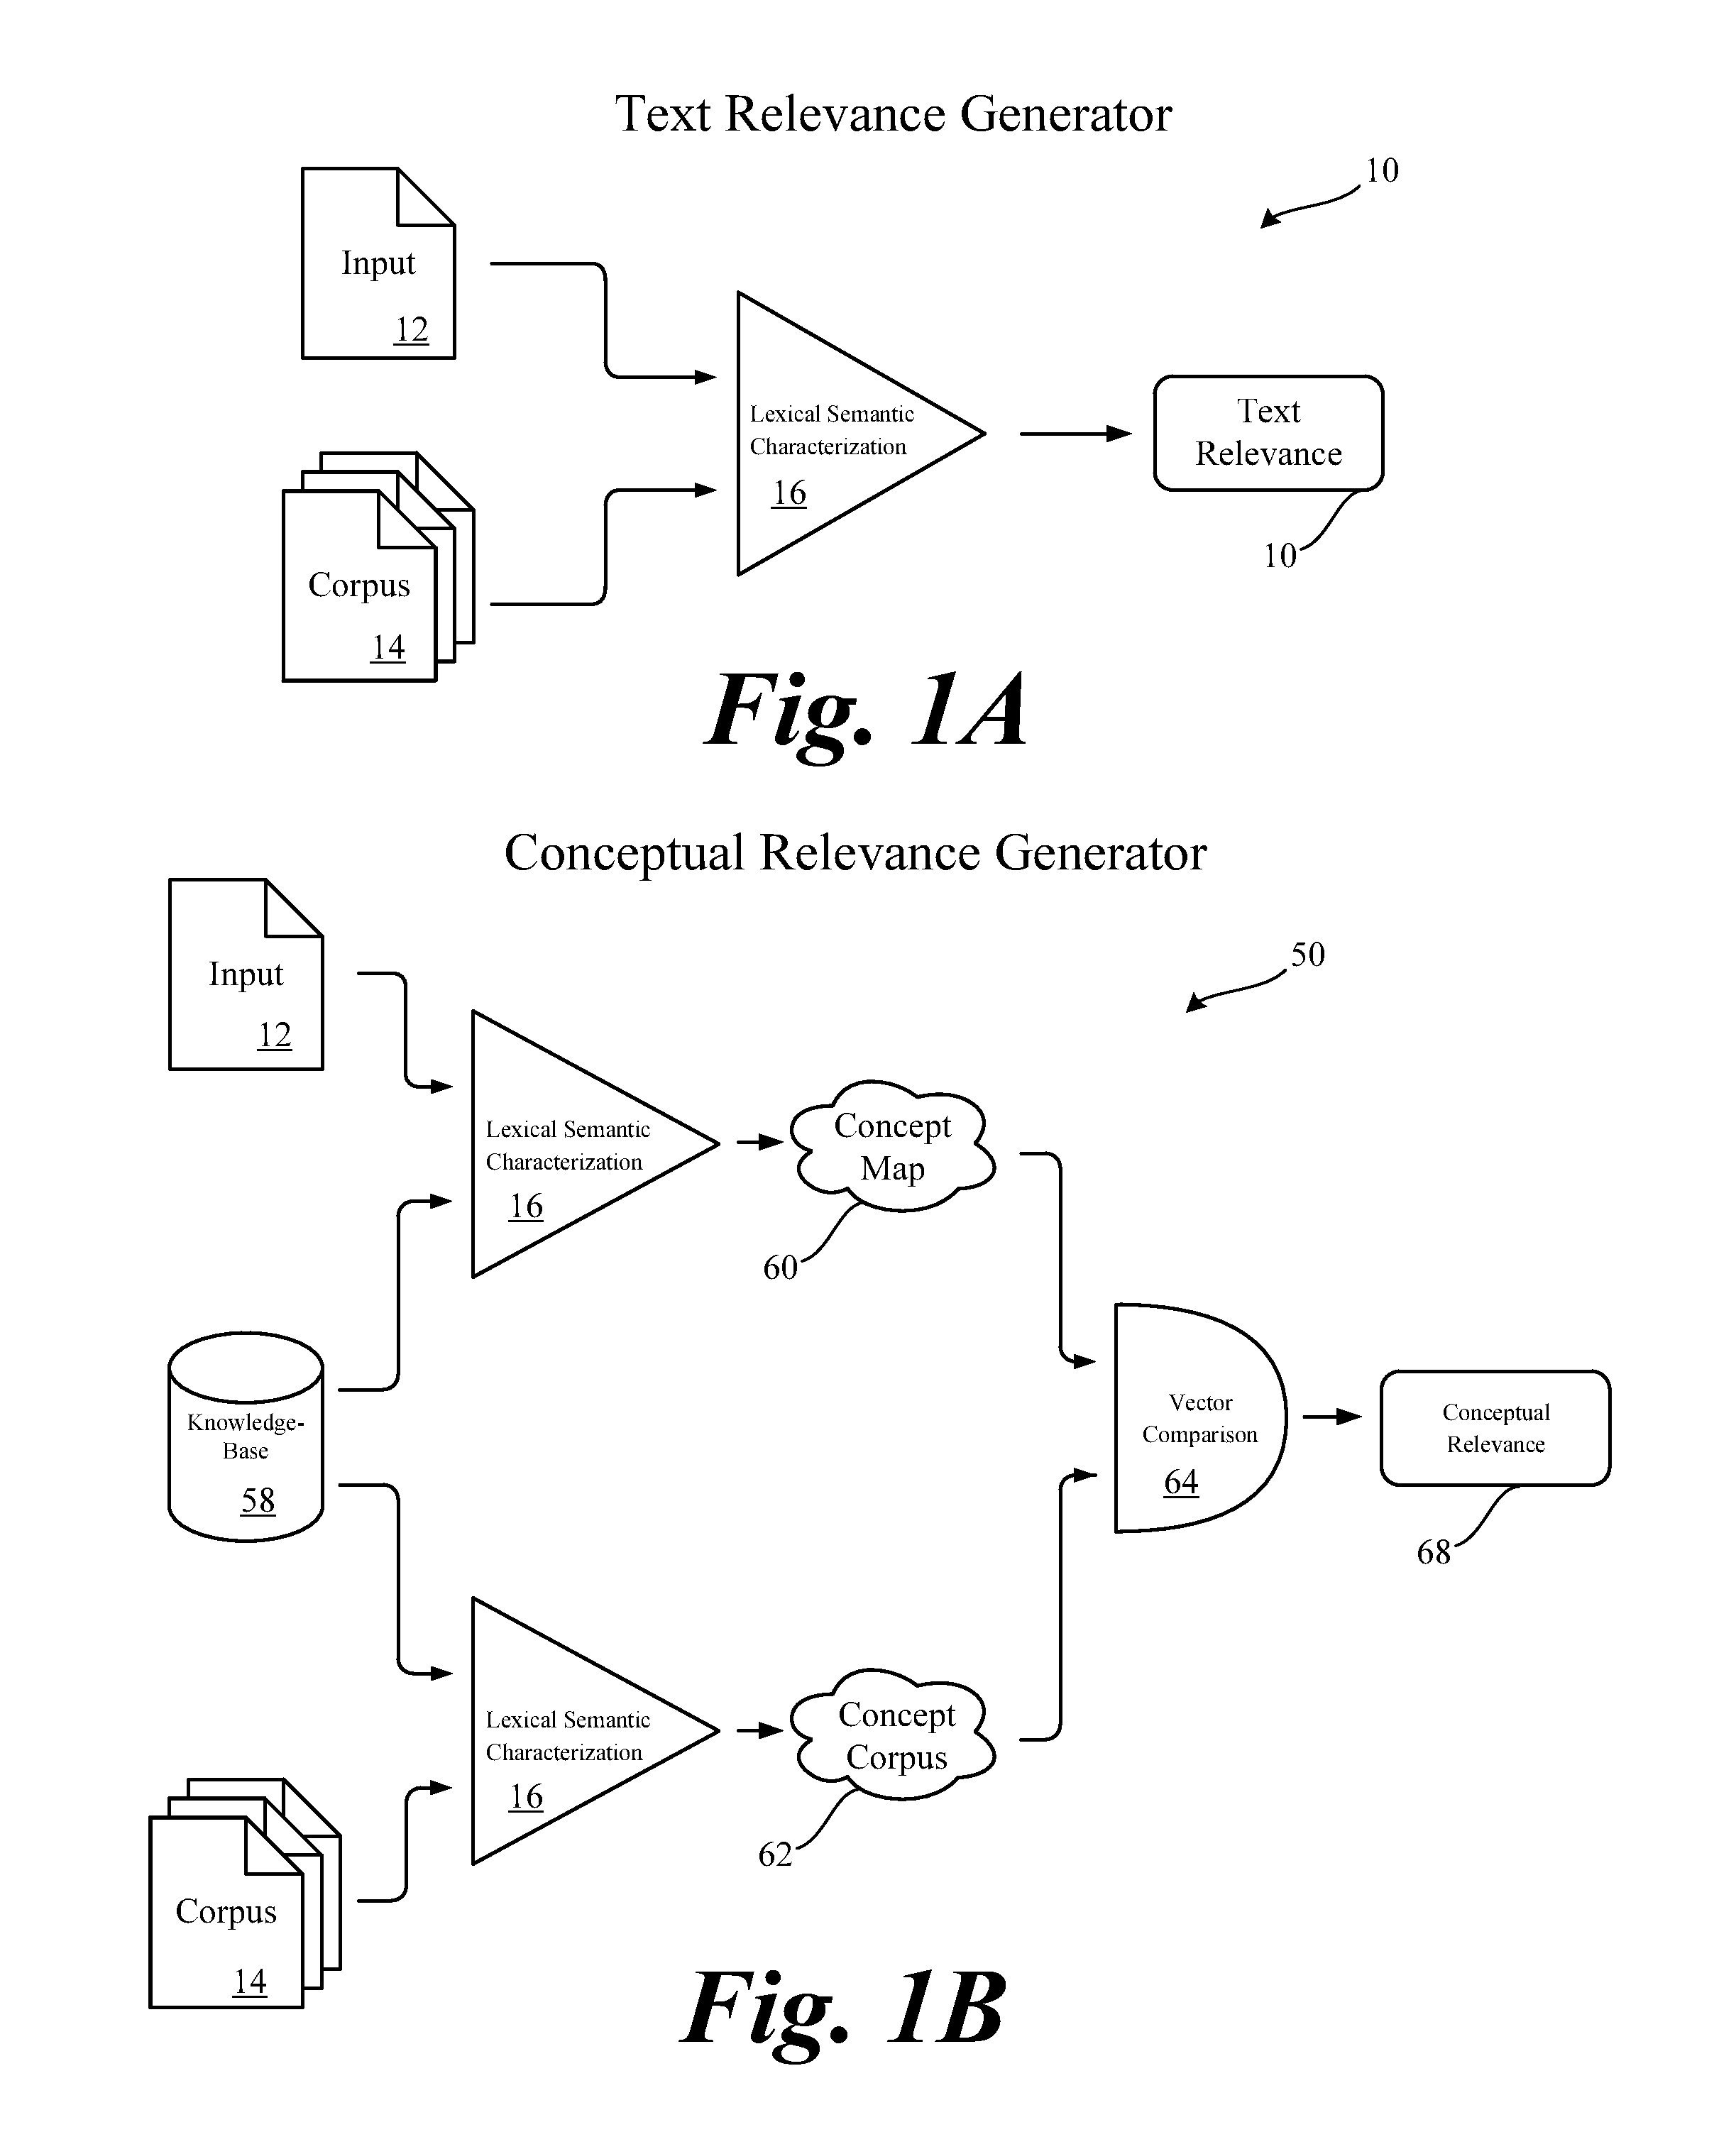 Systems and methods to determine and utilize conceptual relatedness between natural language sources